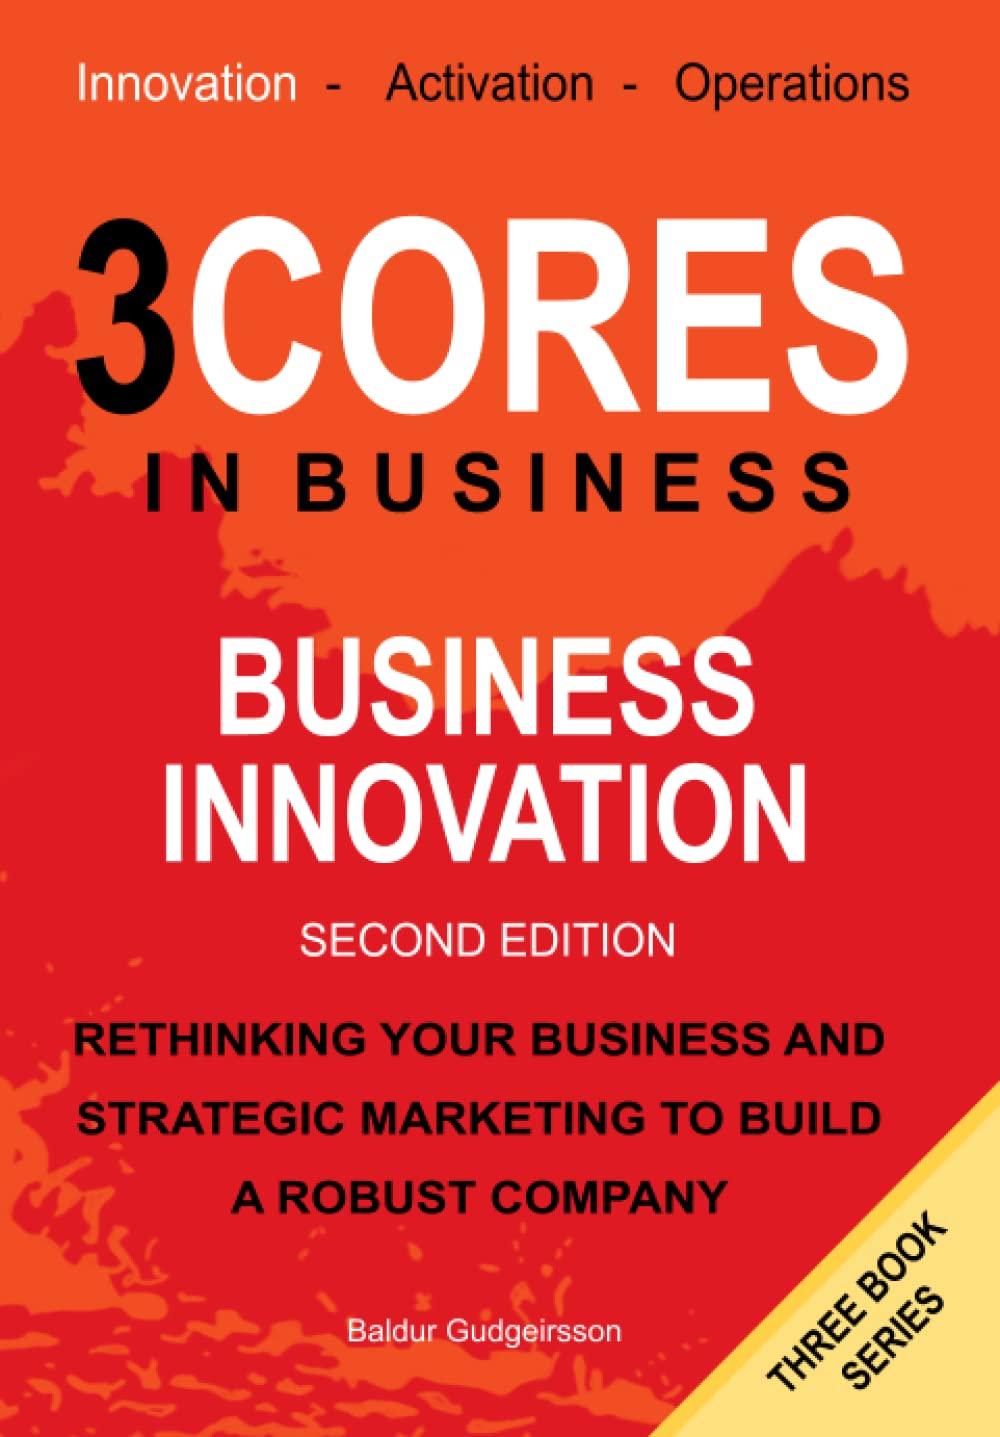 business innovation rethinking your business and strategic marketing to build a robust company 3 cores in